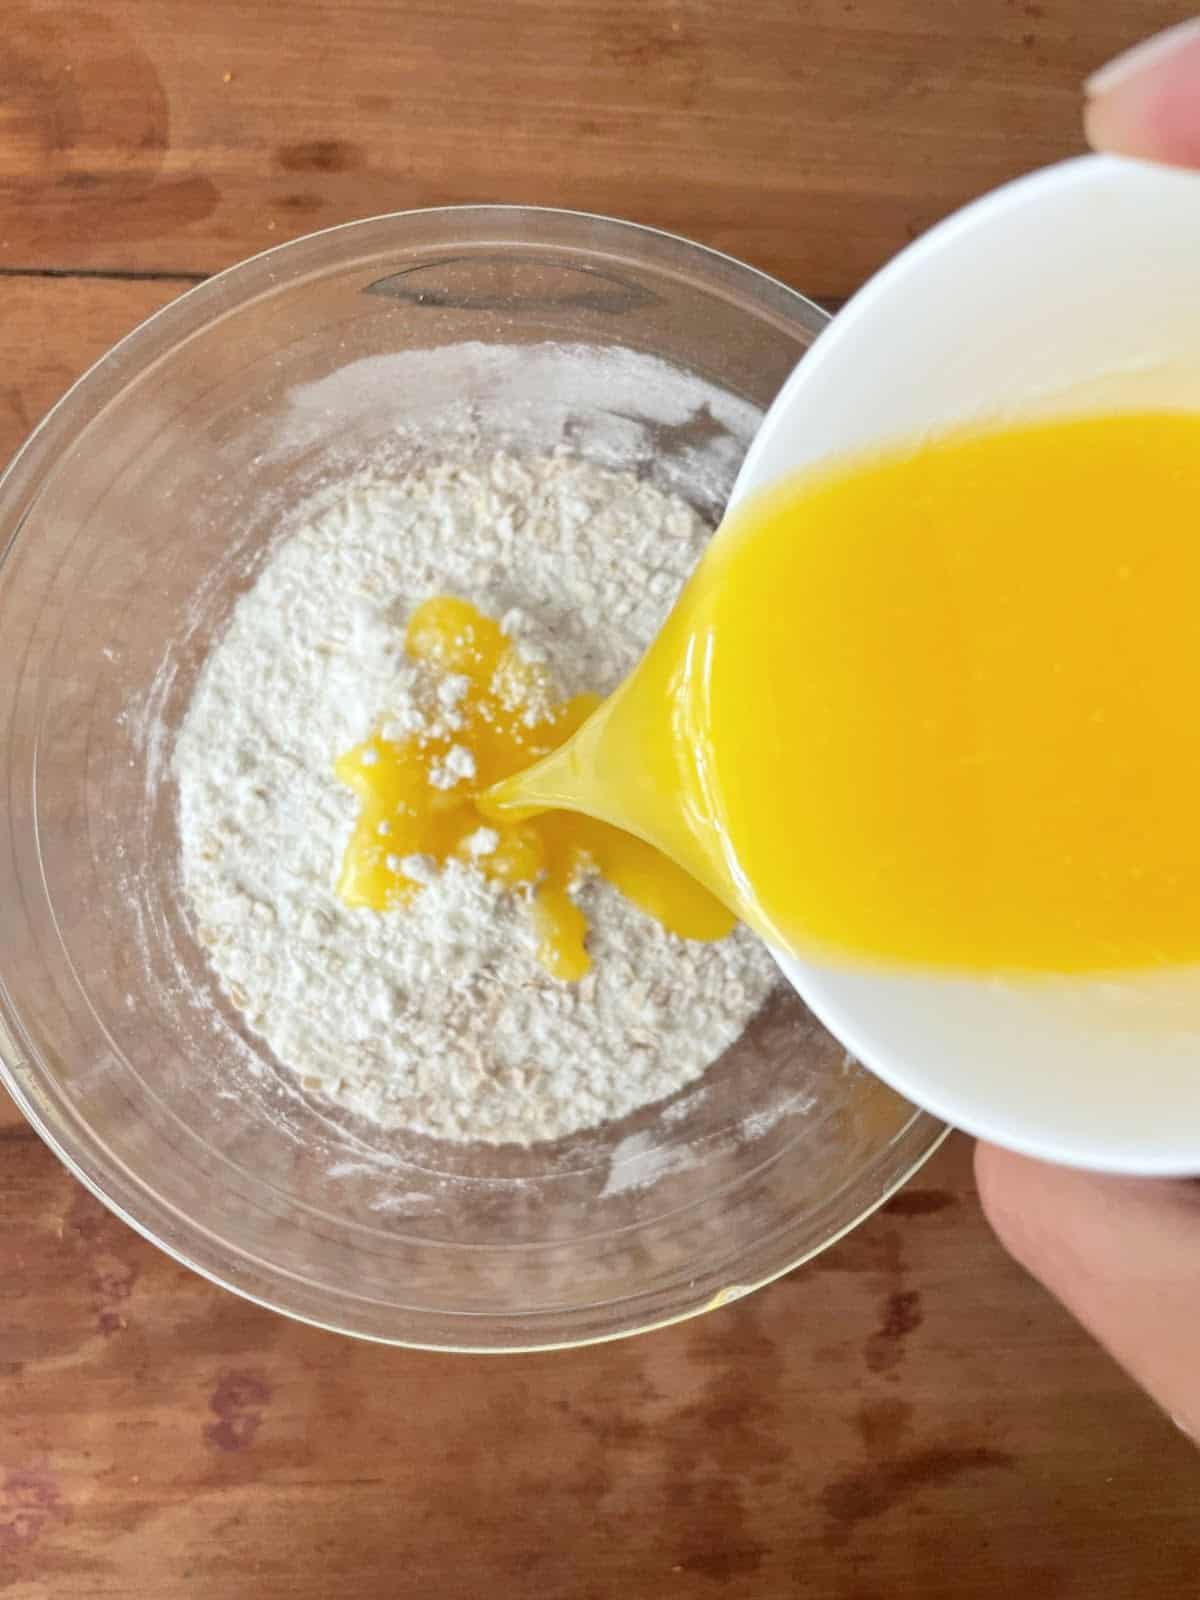 Adding melted butter to dry ingredients in a glass bowl on a wooden table.